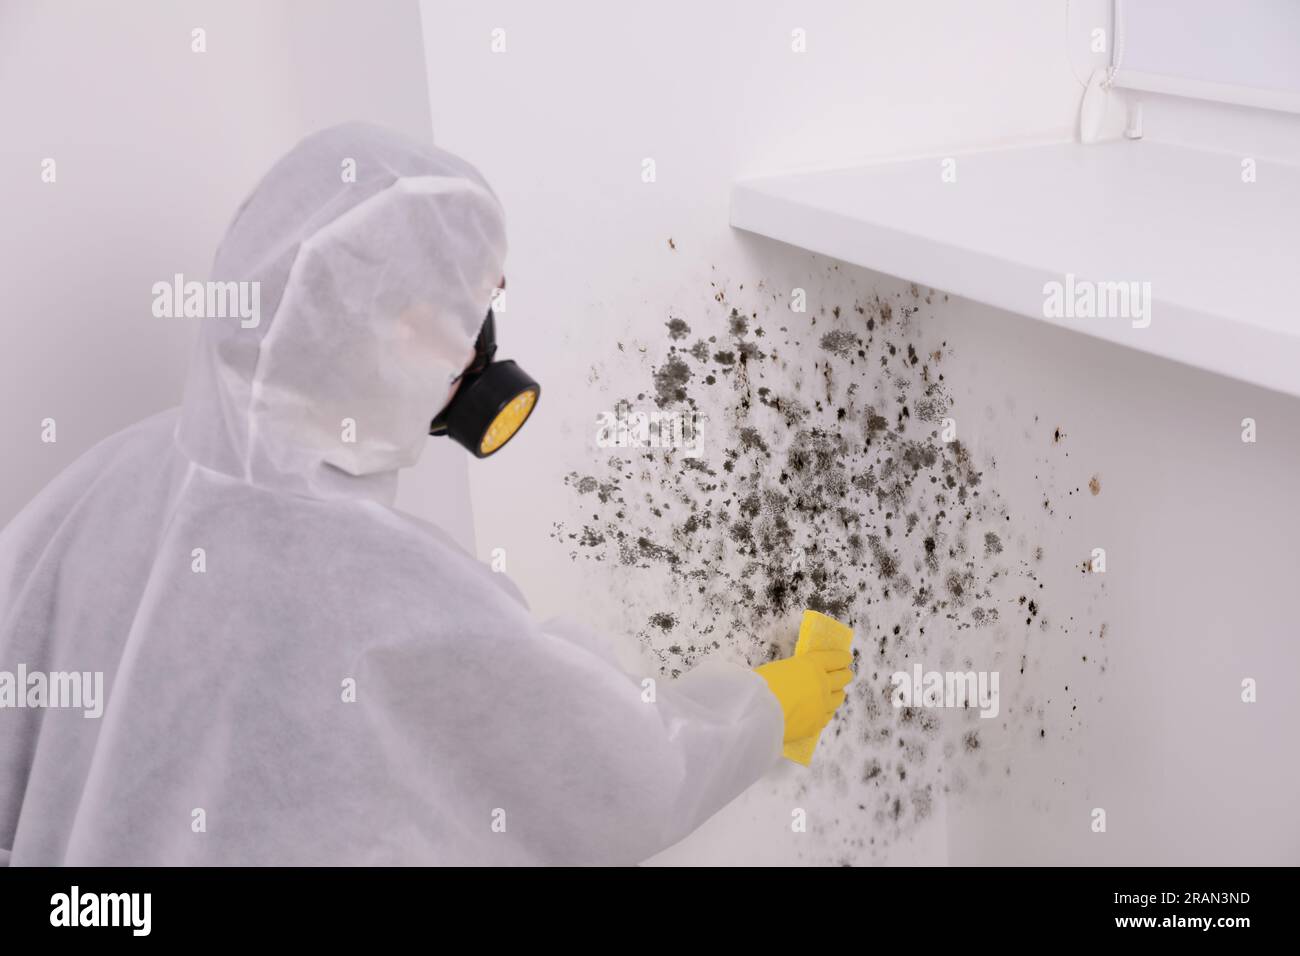 Woman in protective suit and rubber gloves removing mold from wall with rag Stock Photo